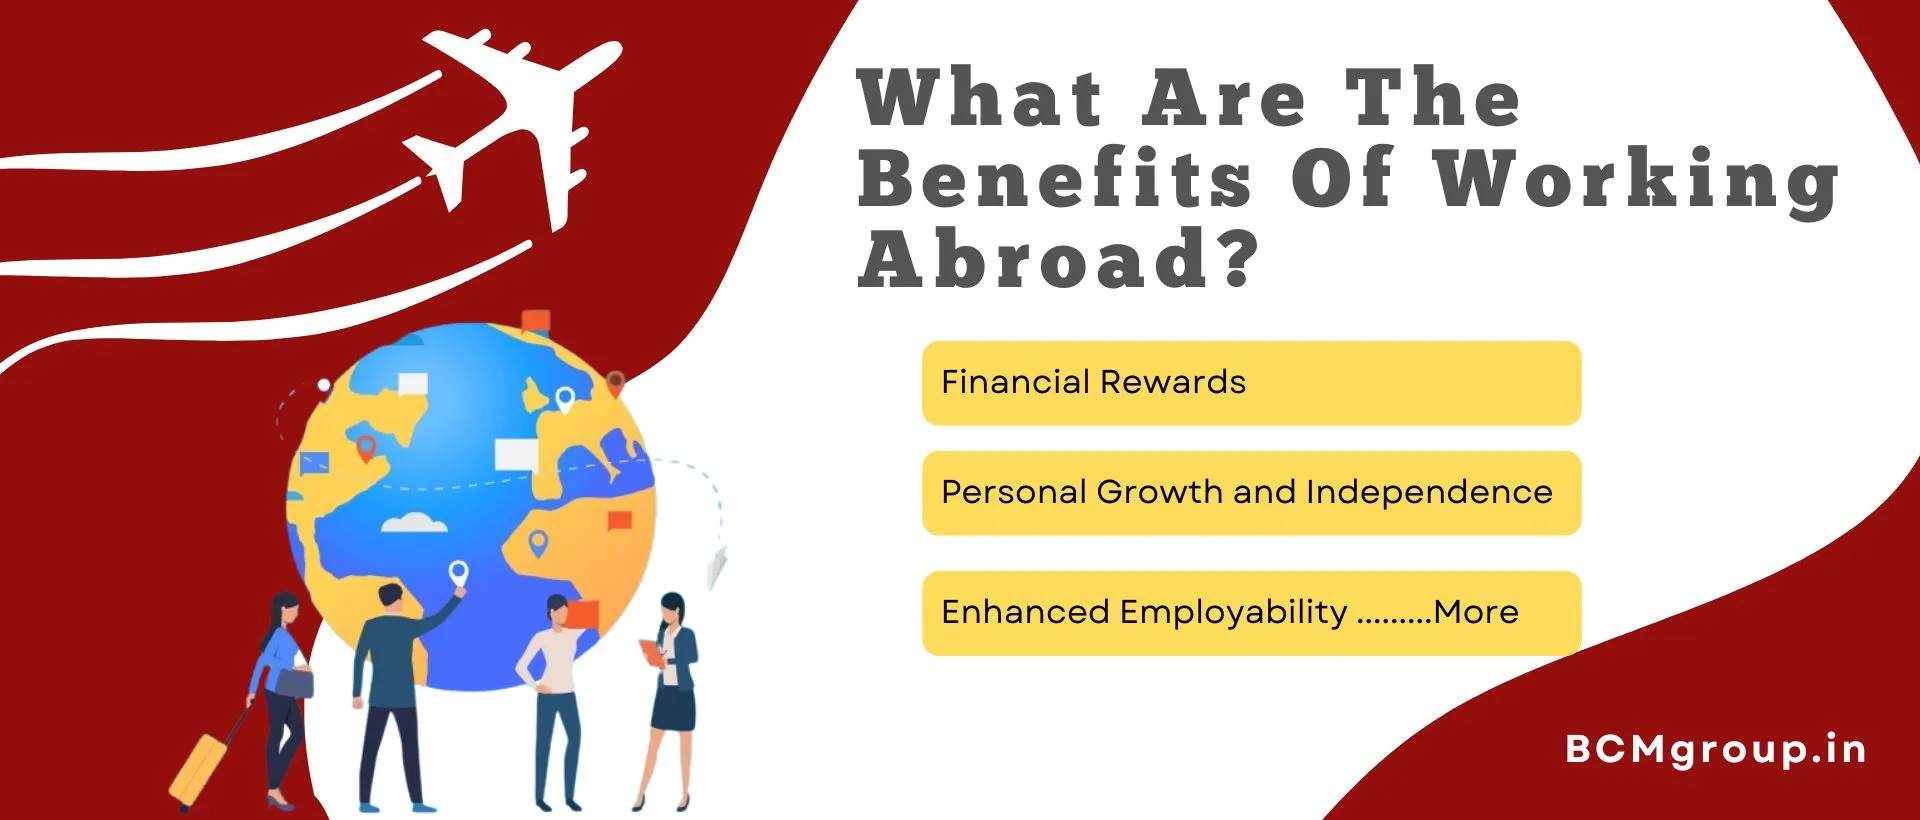 What Are The Benefits Of Working Abroad